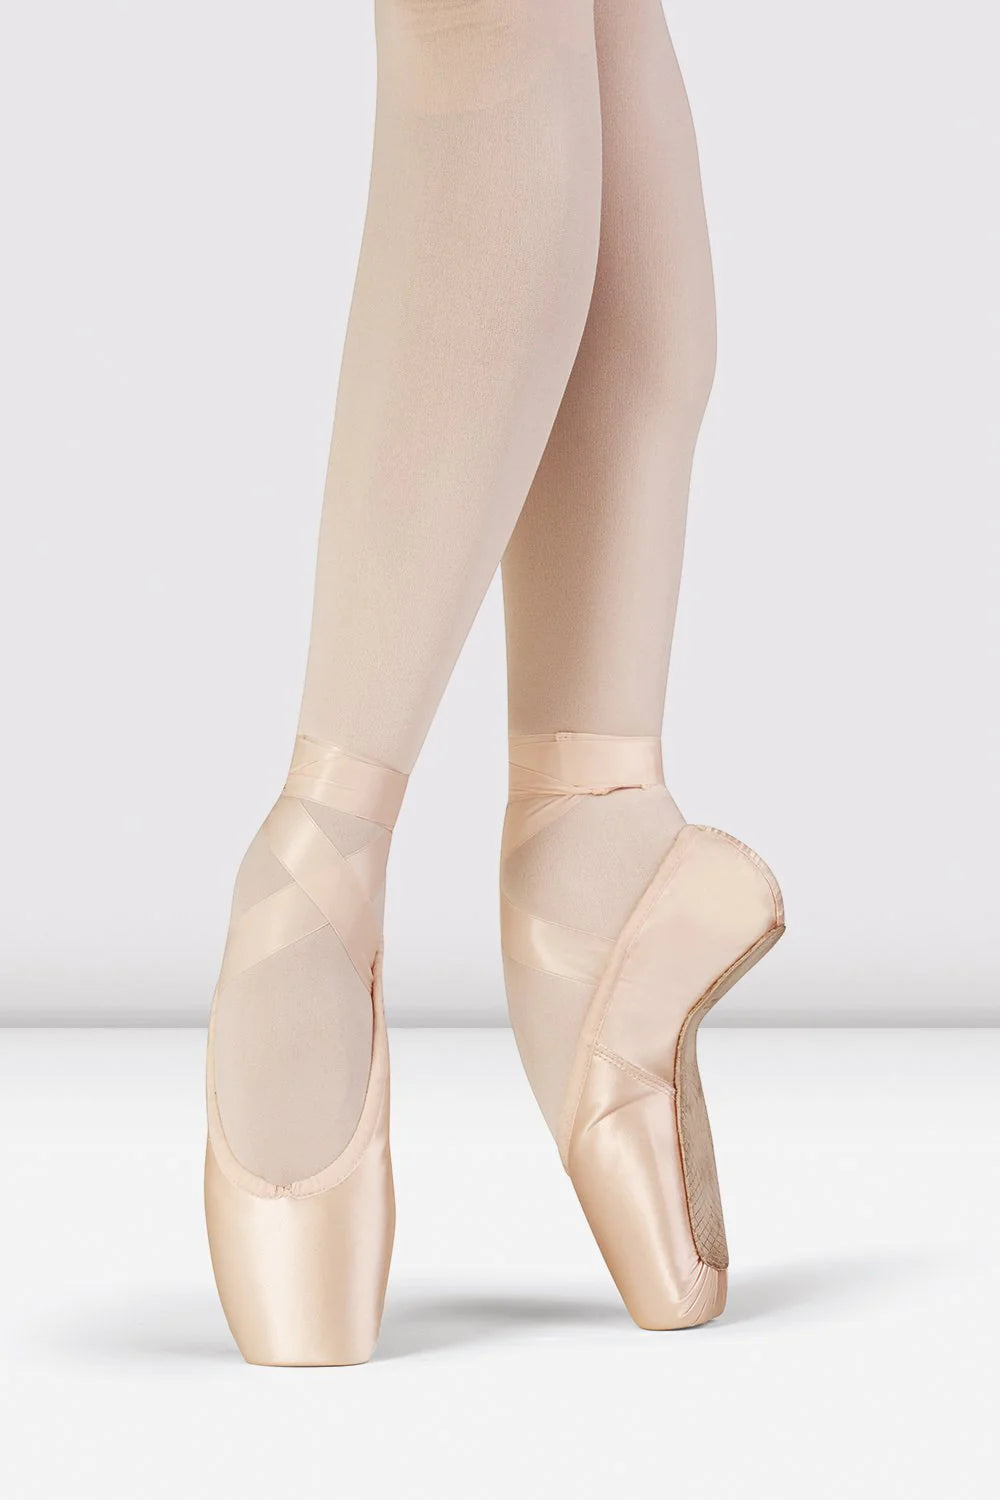 Bloch Grace Pointe Shoe SO161L - Special Order ONLY